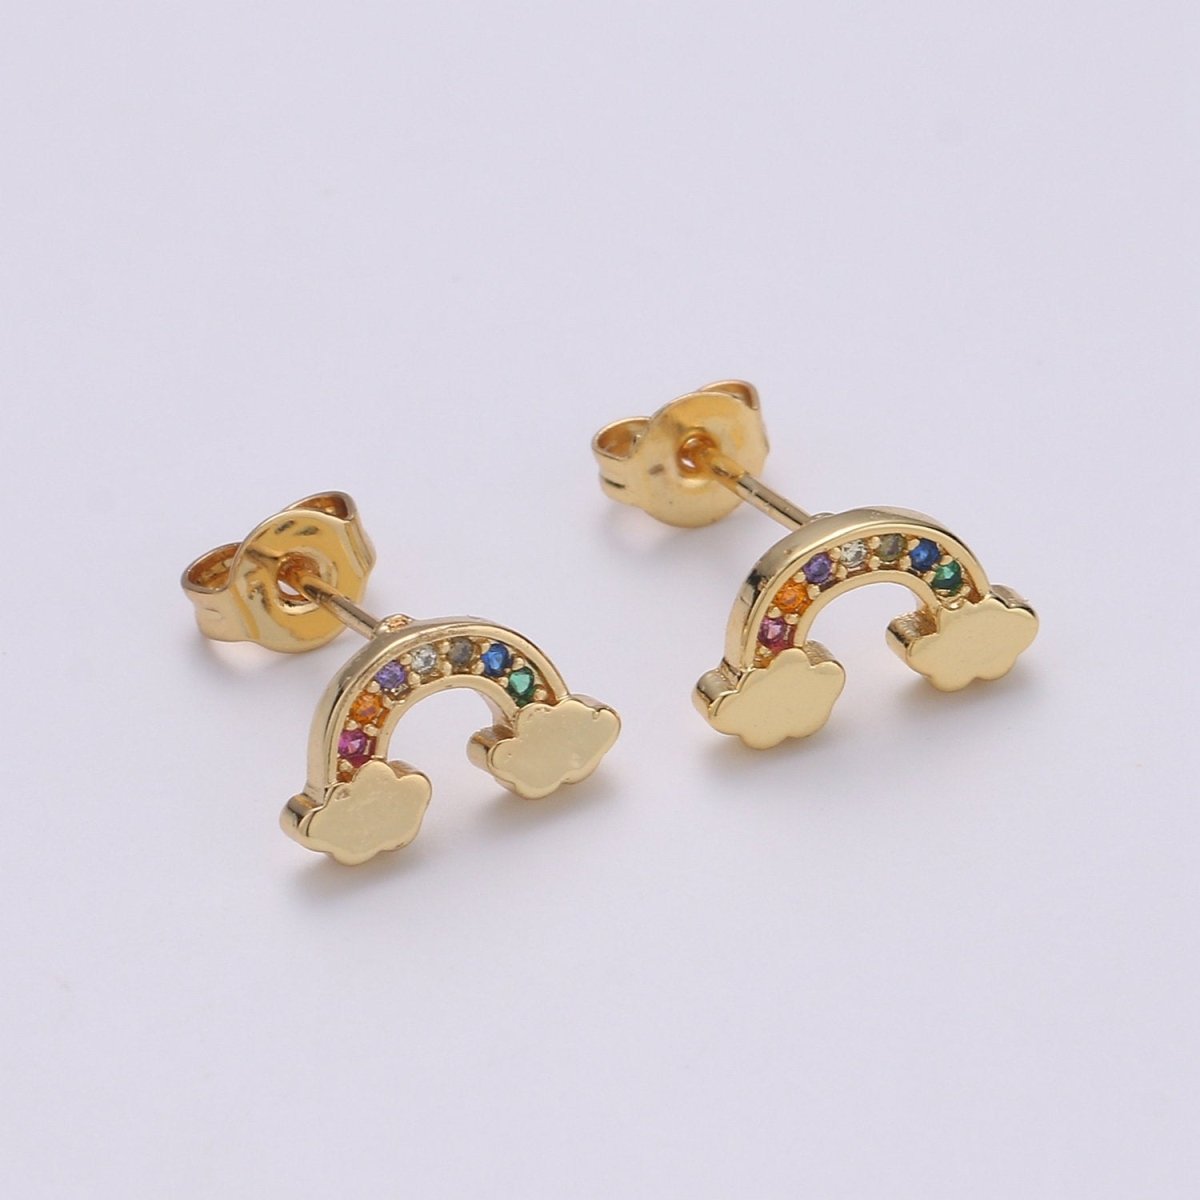 Tiny CZ Rainbow Stud Earrings Dainty Multi Color Cloud Stud Earring Gold Minimalist Jewelry for her christmas gift Q-260 - DLUXCA